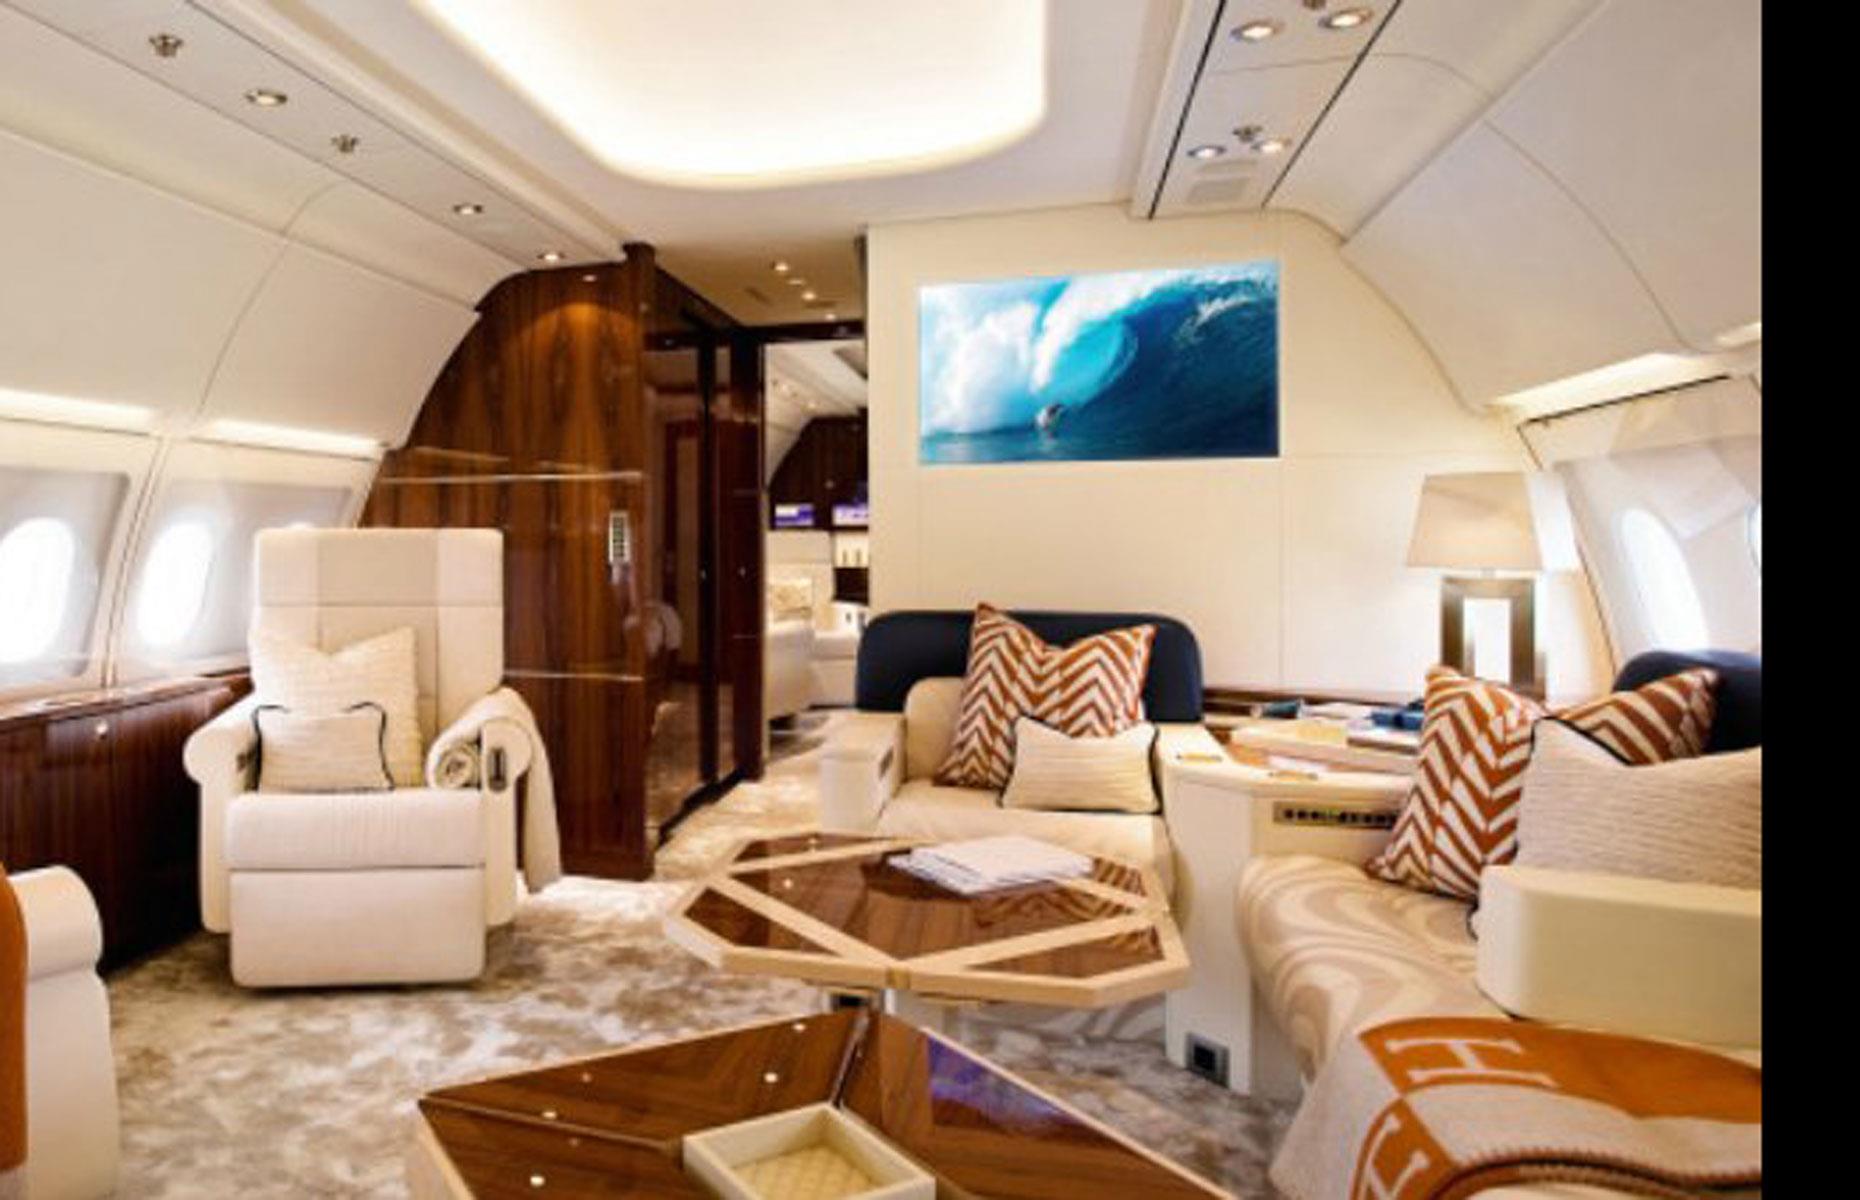 <p>It's got the requisite interior finishes that billionaire private jet owners seem to love: think highly polished wood, creamy upholstery, and gold accents. And that's not to mention the plane's fine chestnut tables and designer furnishings... </p>  <p>However, this wasn't quite enough for Abramovich. He opted to upgrade to a new plane in December 2021, trading in the 767 for a 787. </p>